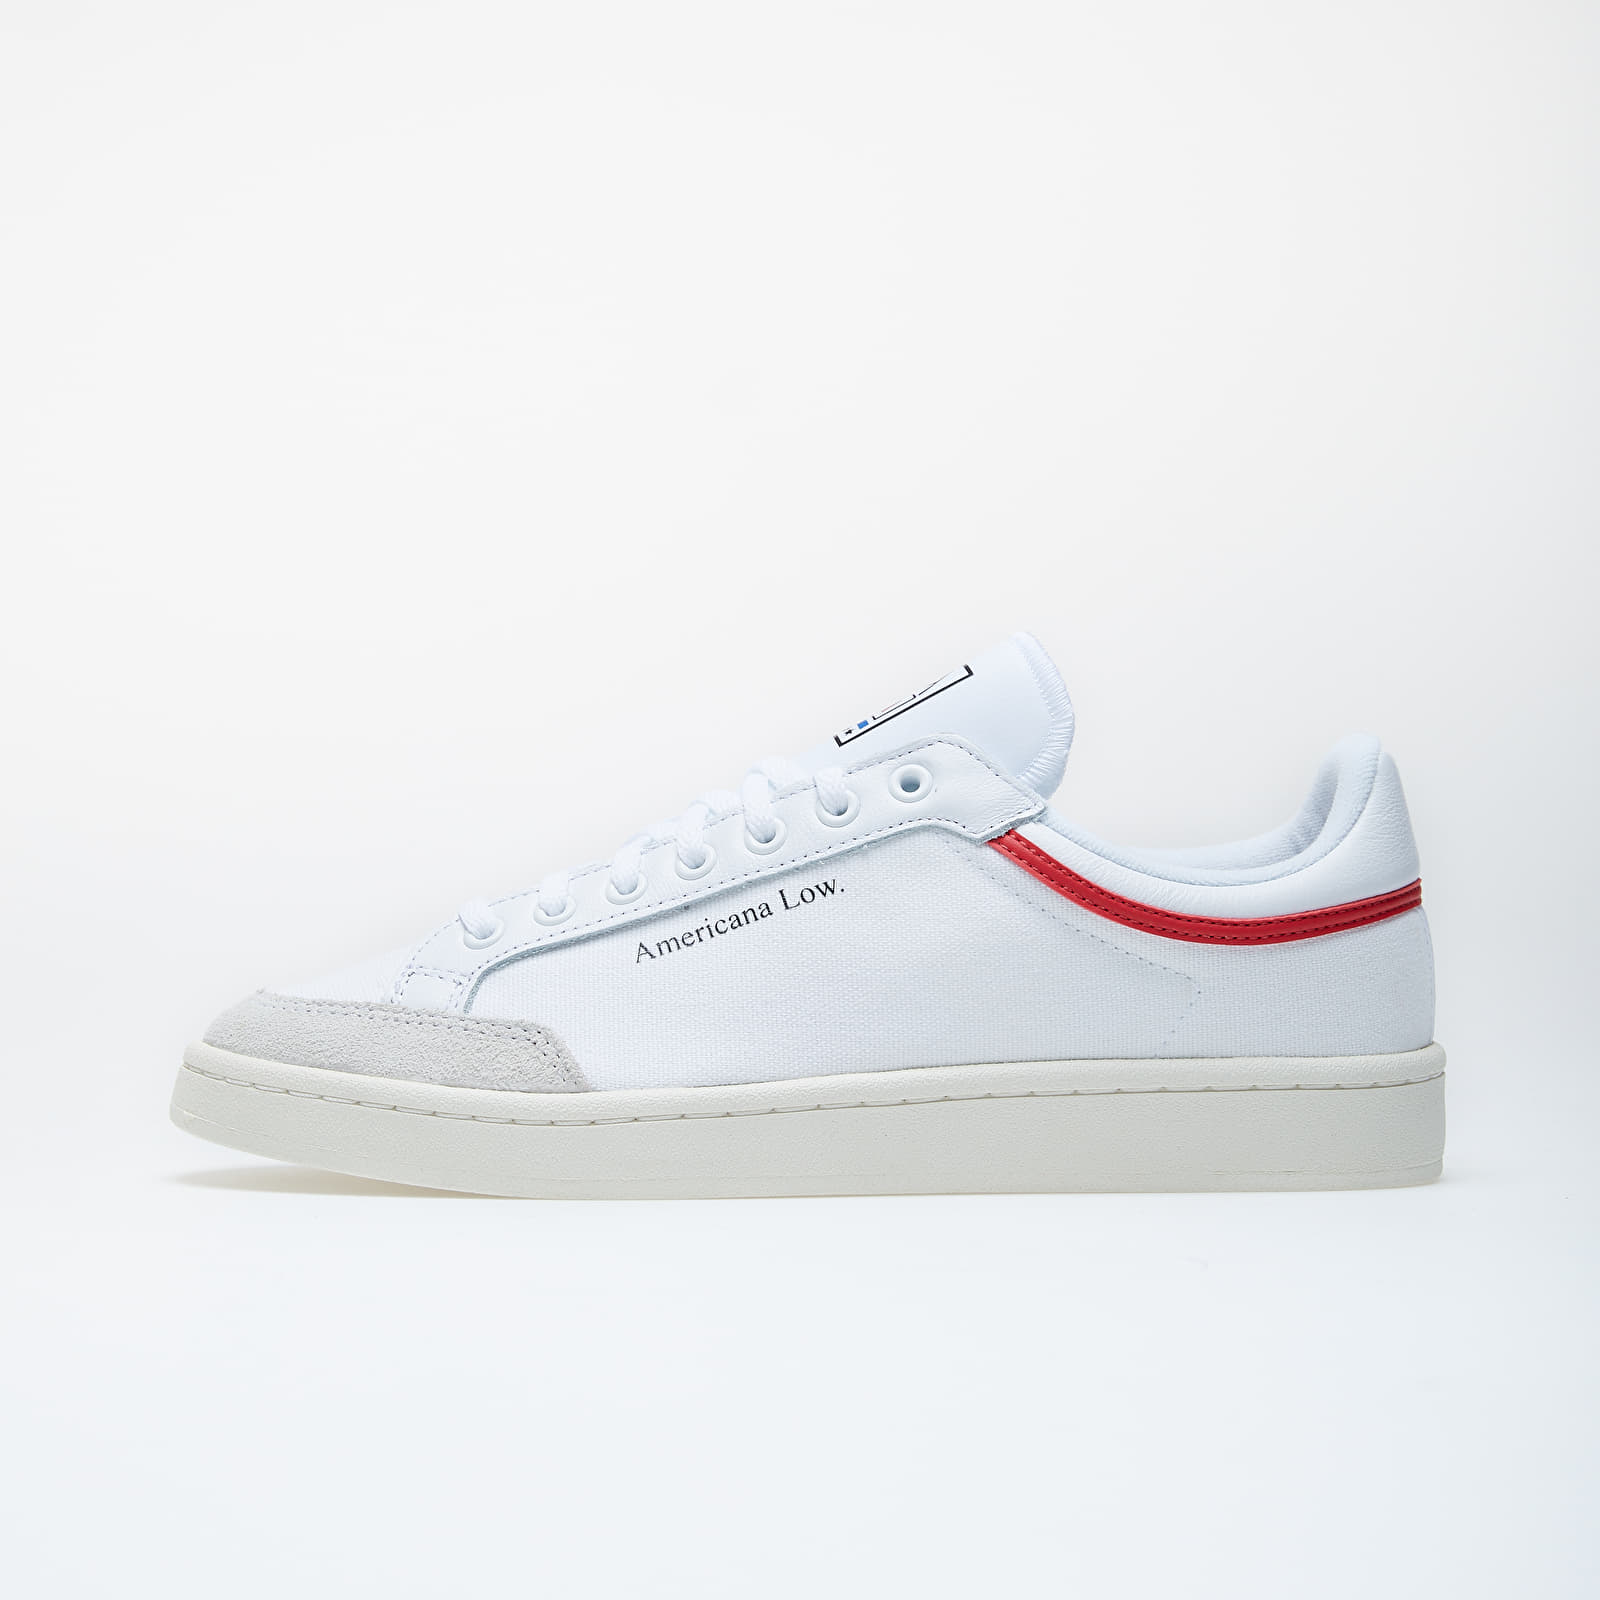 Chaussures et baskets homme adidas Americana Low Ftw White/ Glow Red/ Core White